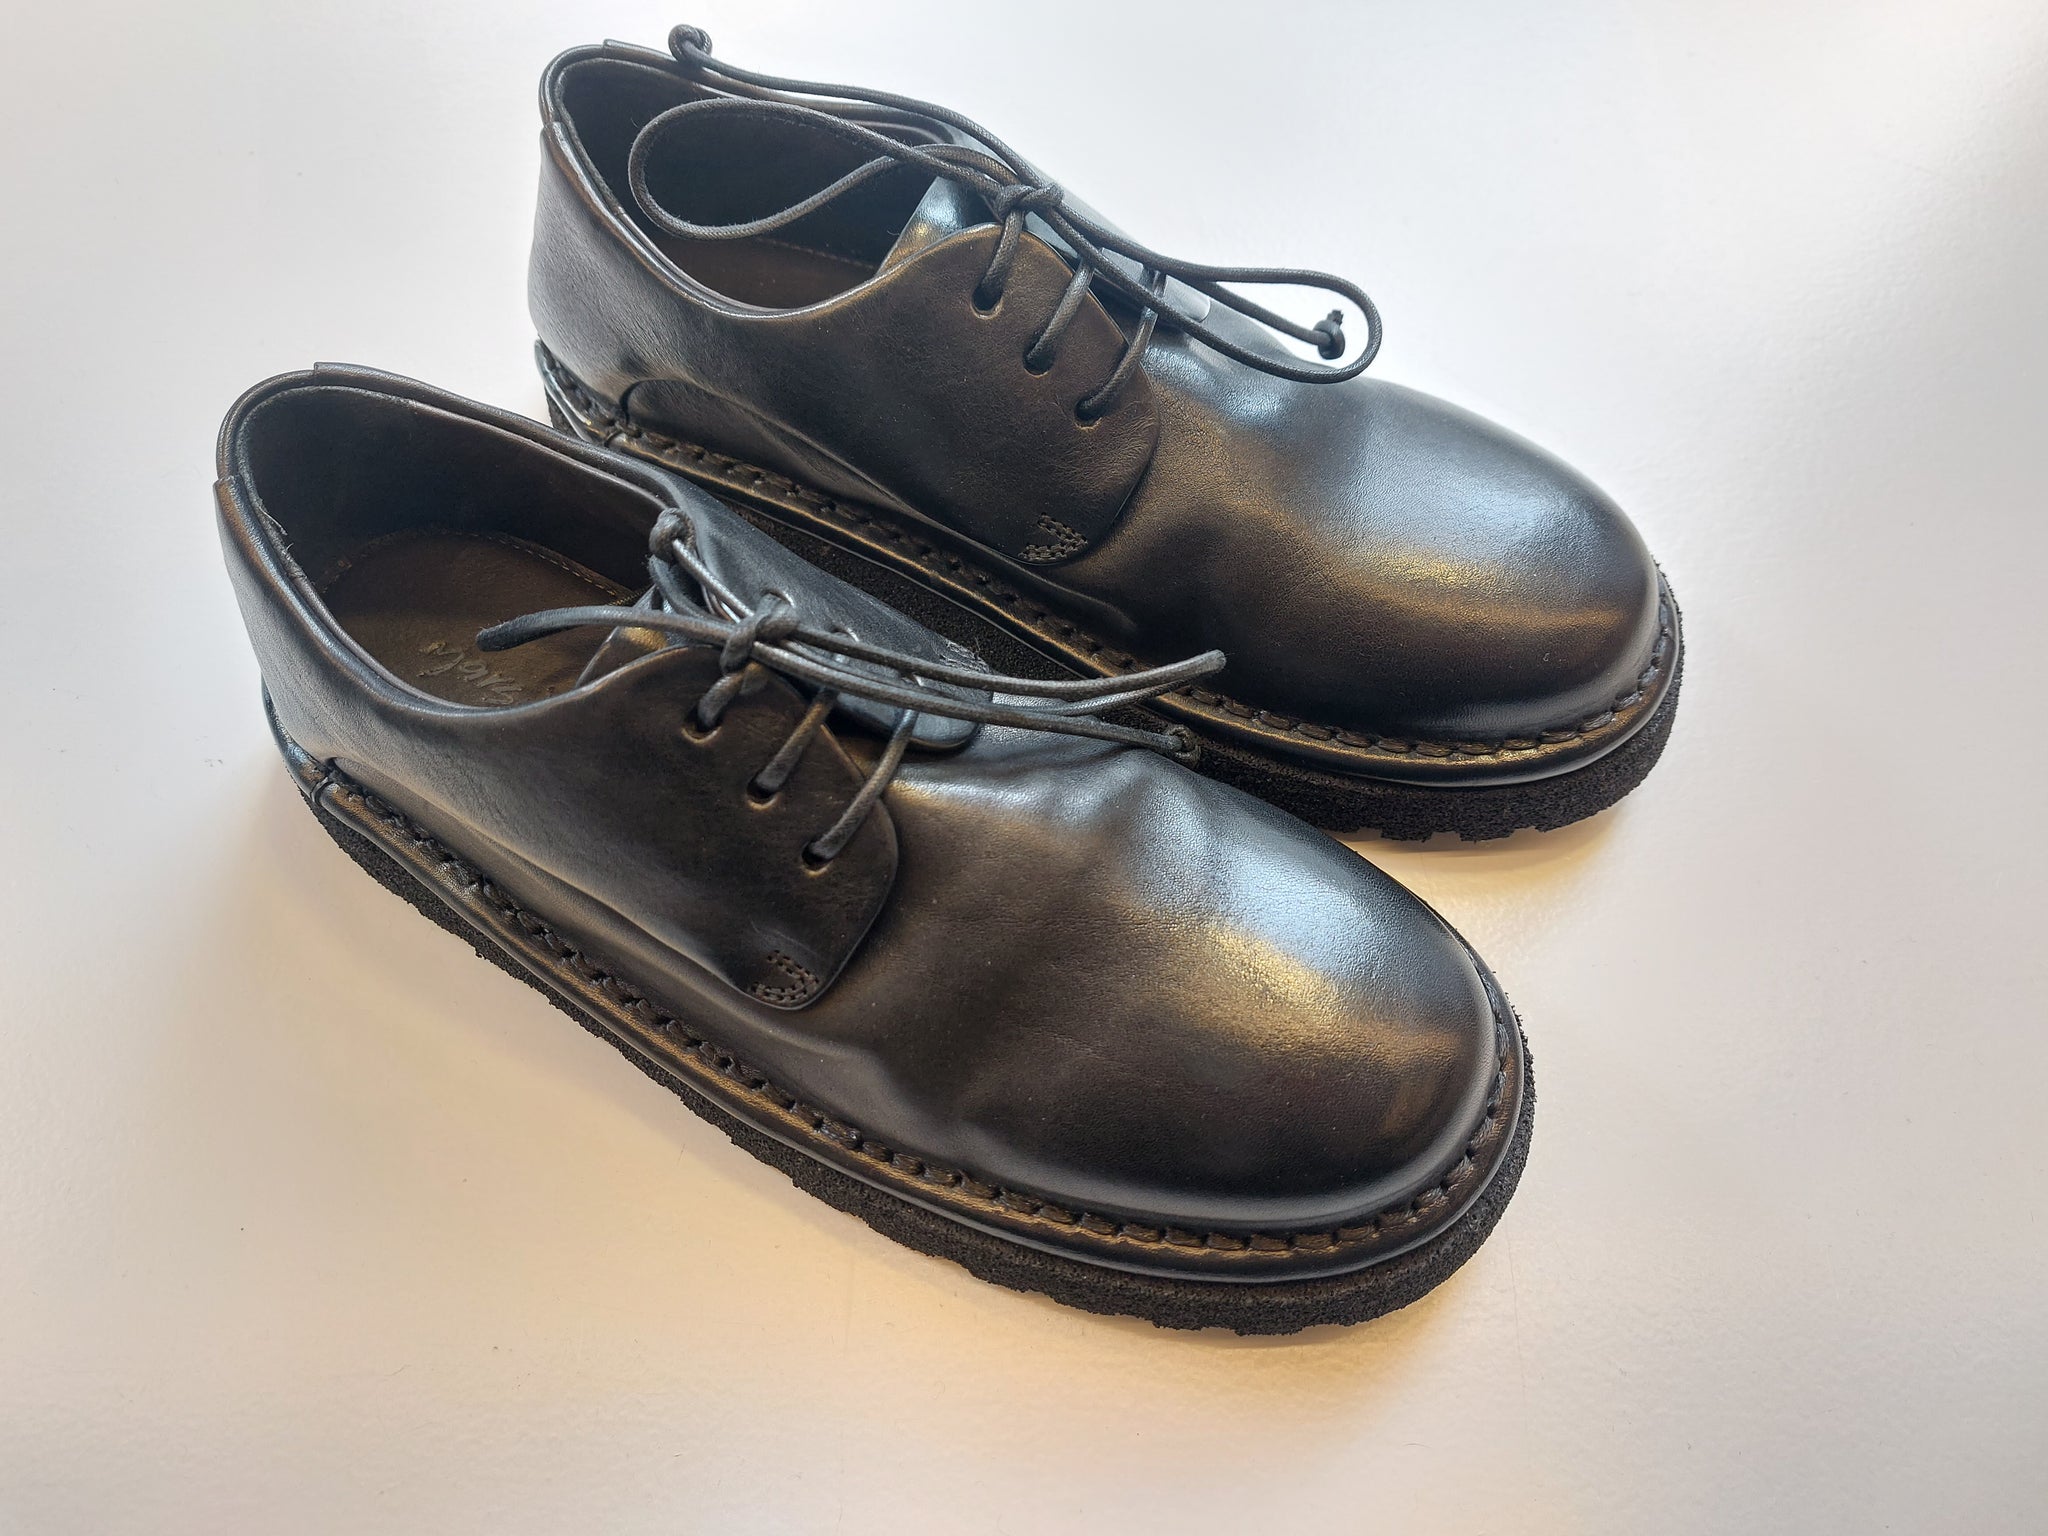 Black lace- up gomma style w lighter sole.